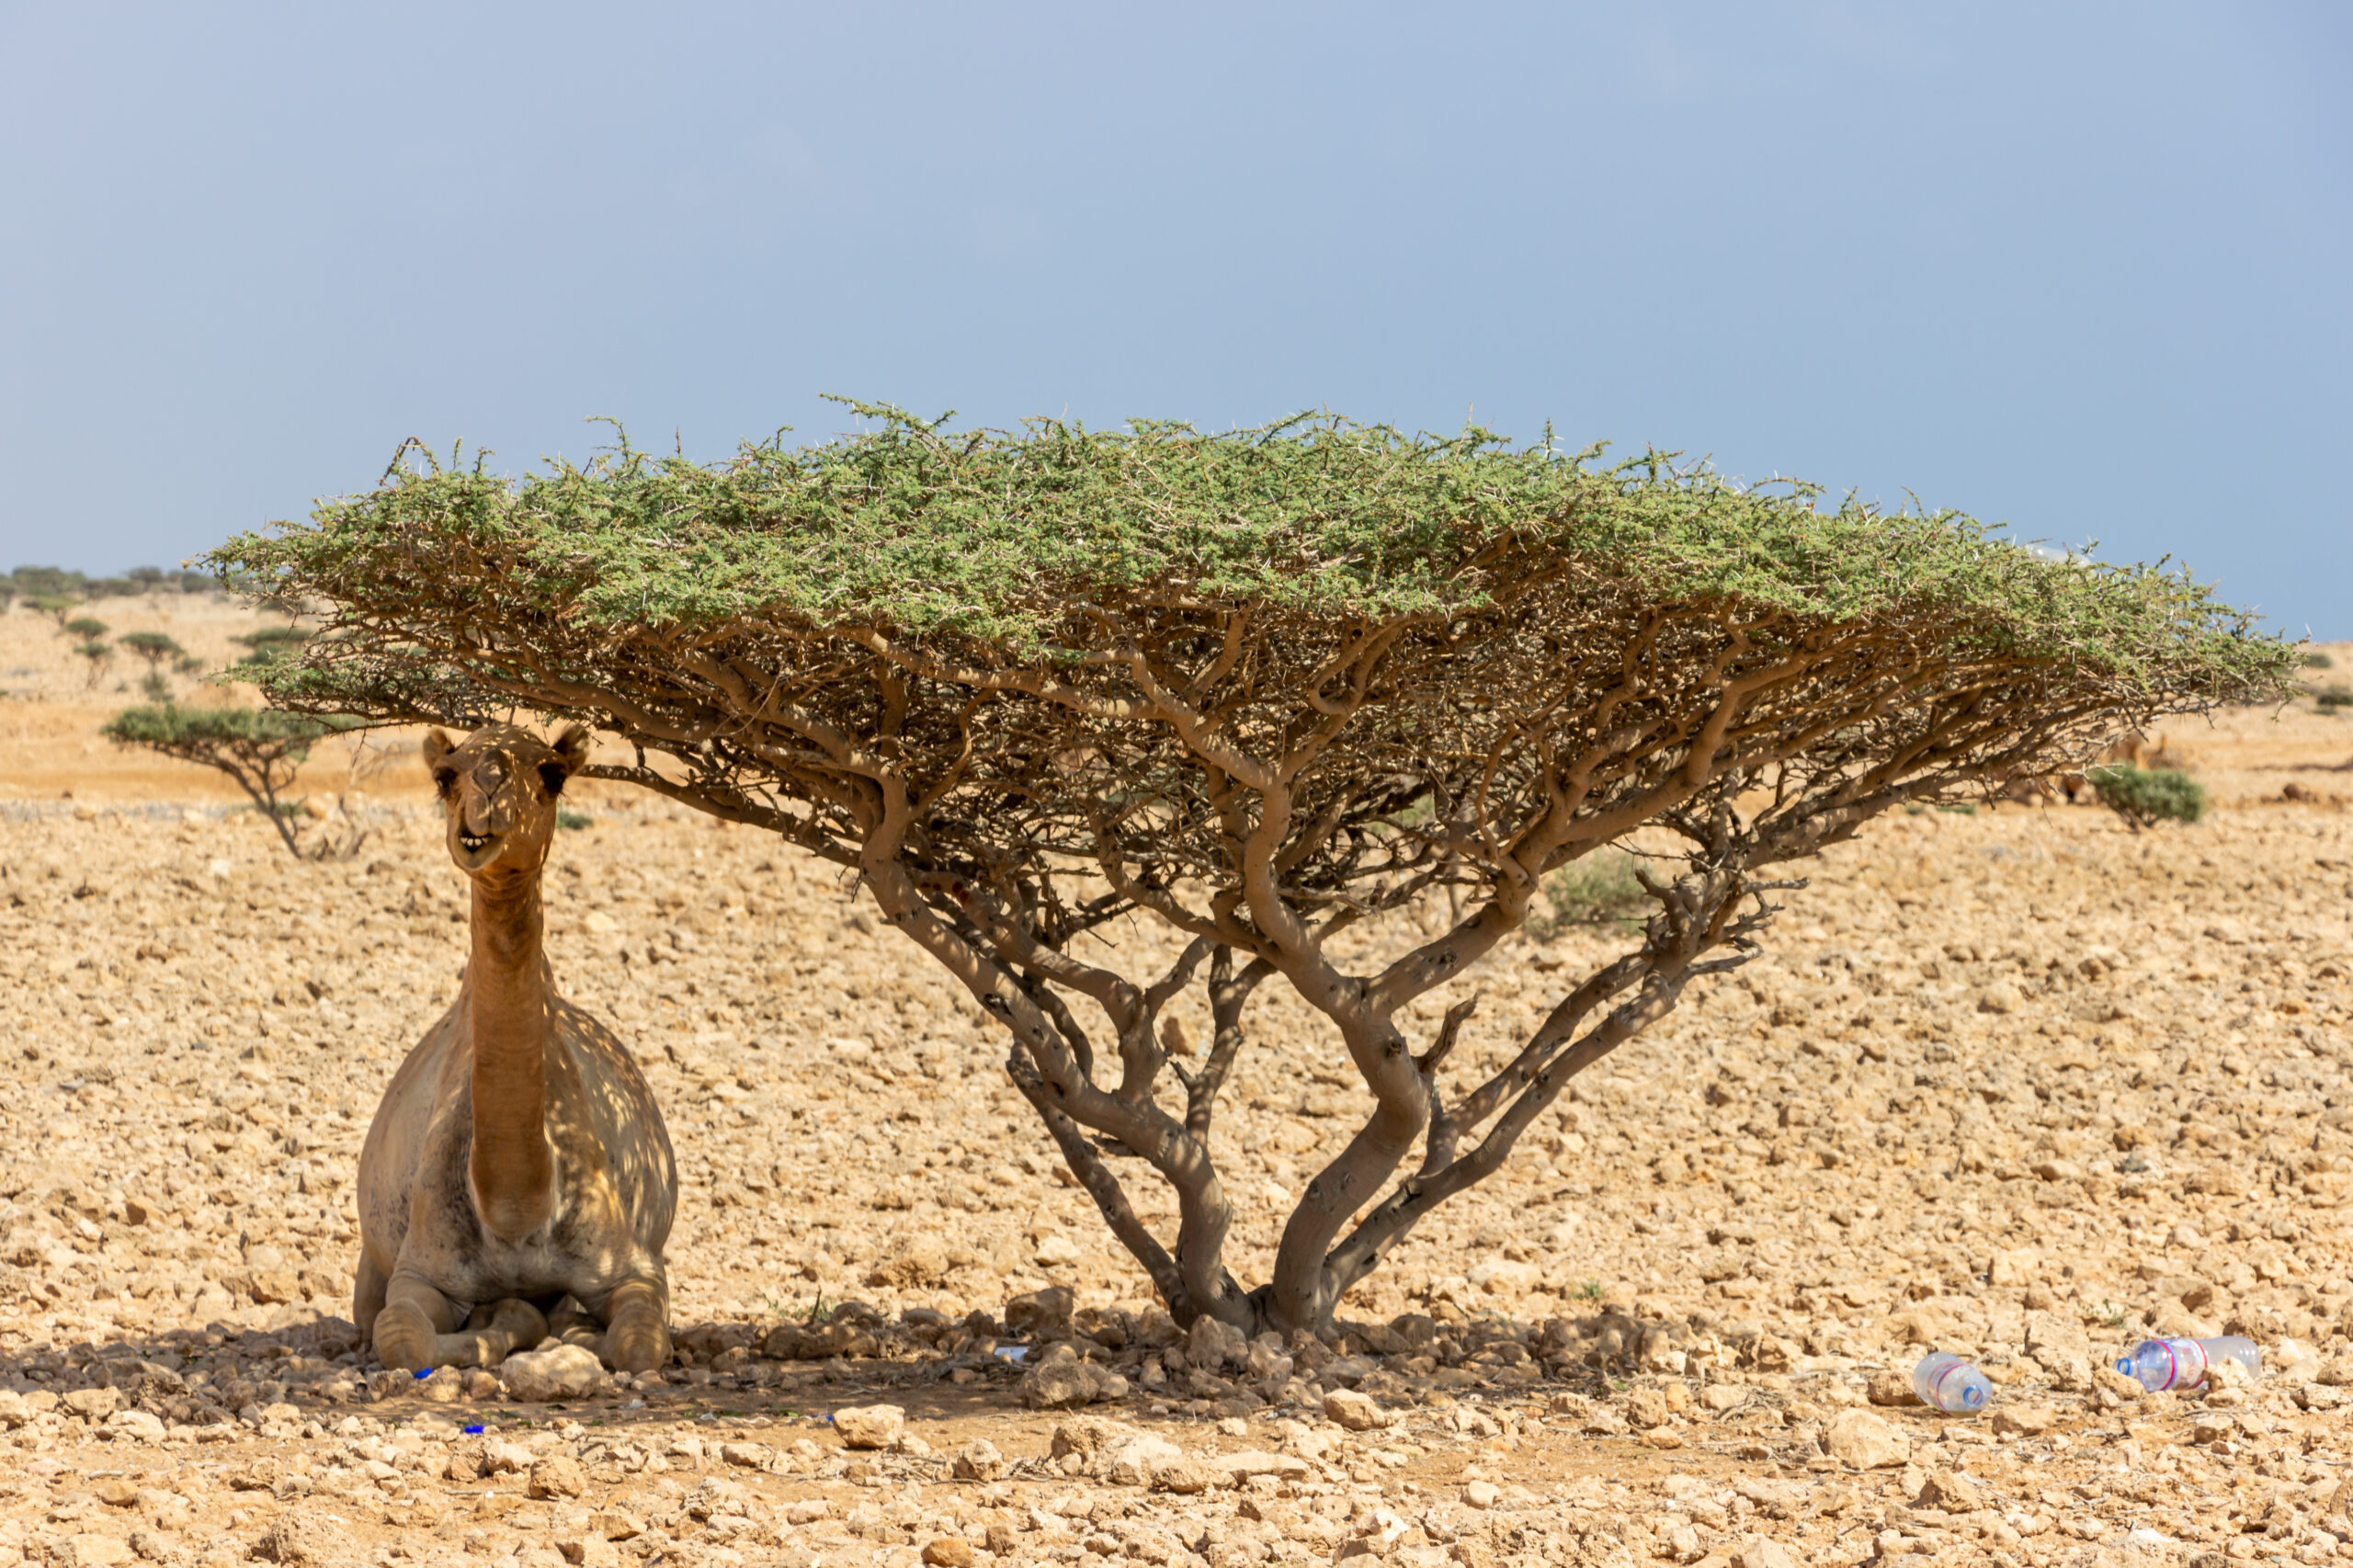 Tales of the Djibouti Beauty of wildlife by Camille Massida Photography